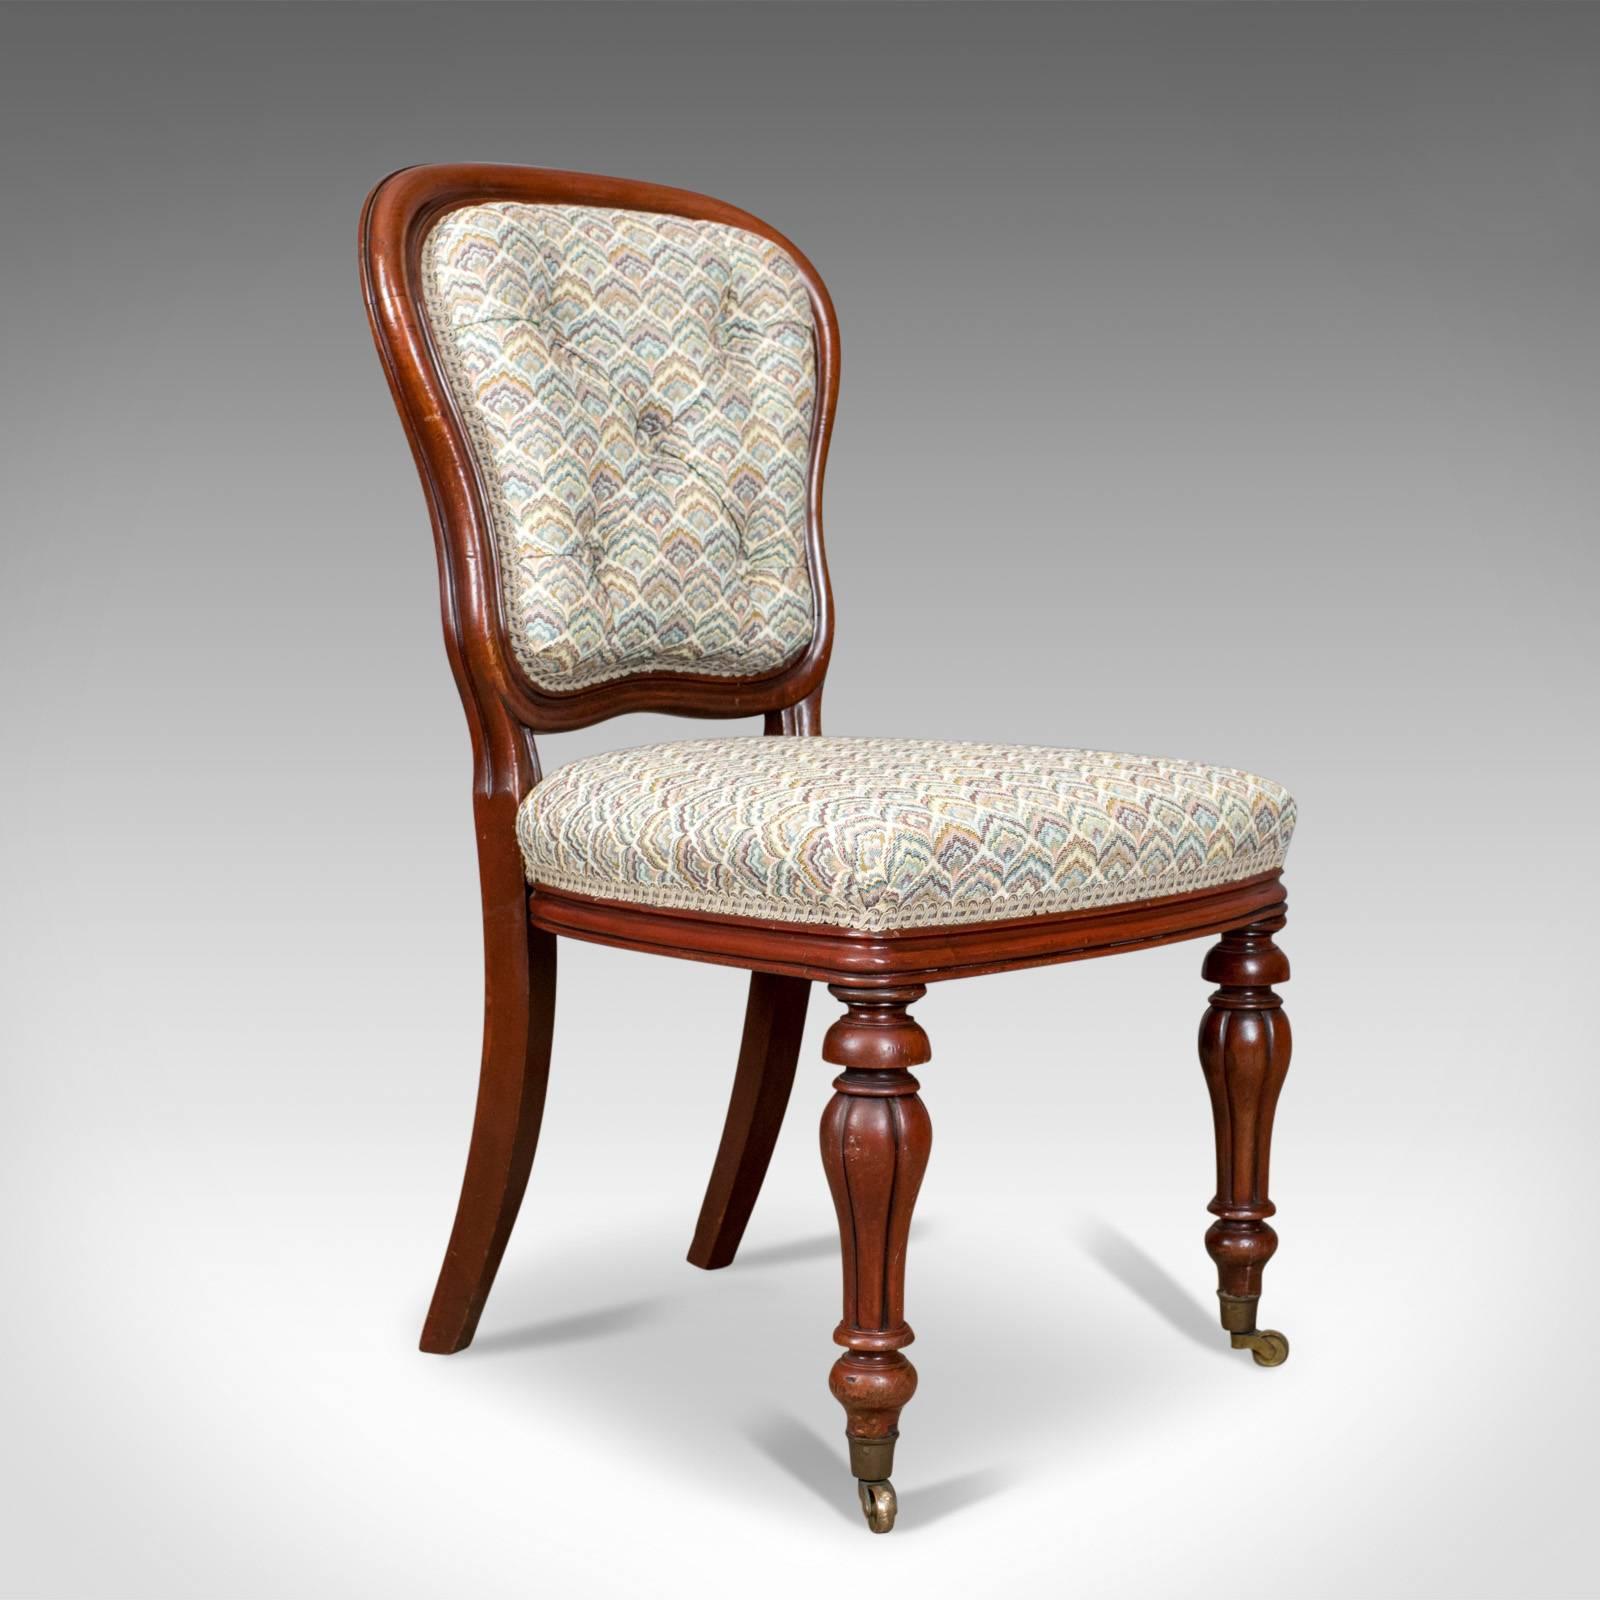 This is an antique pair of chairs, two English, William IV, mahogany button back parlour, or side, chairs dating to circa 1835.

Of quality craftsmanship and in fine order
Deep, dark, lustrous, mahogany frames
Traditionally stuffed and